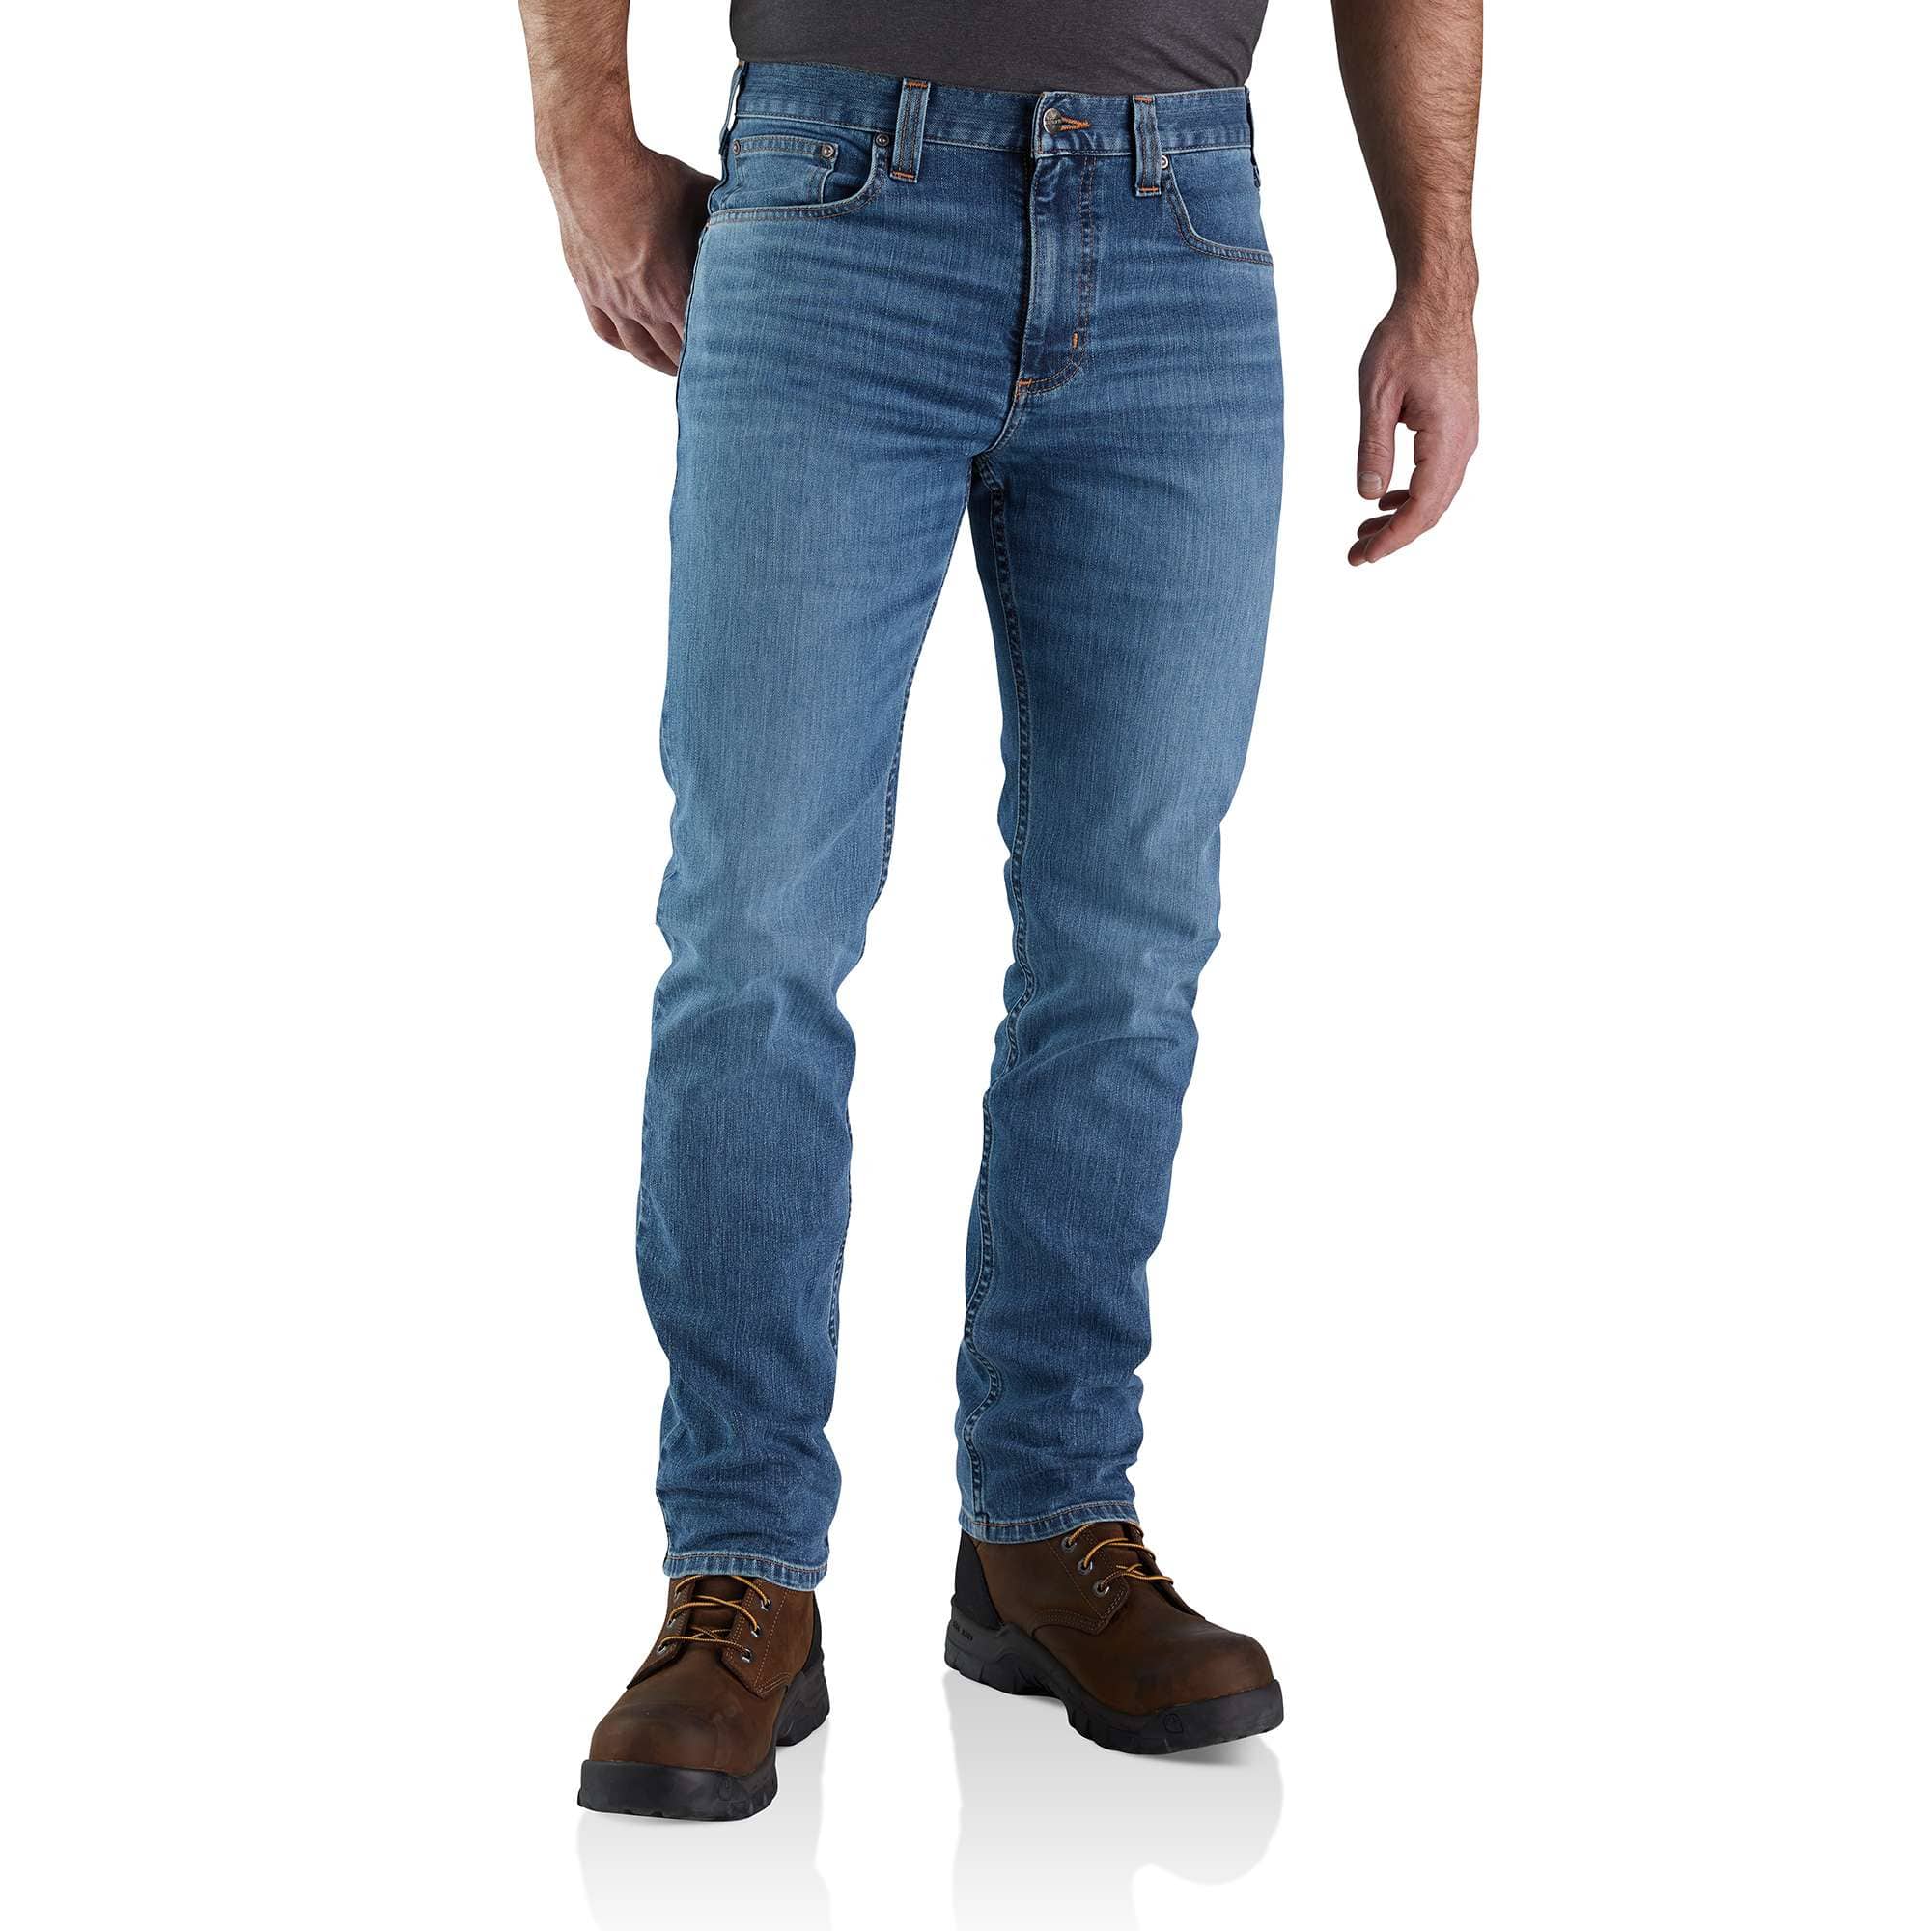 Carhartt Men's Rugged Flex Utility Jean - Traditions Clothing & Gift Shop